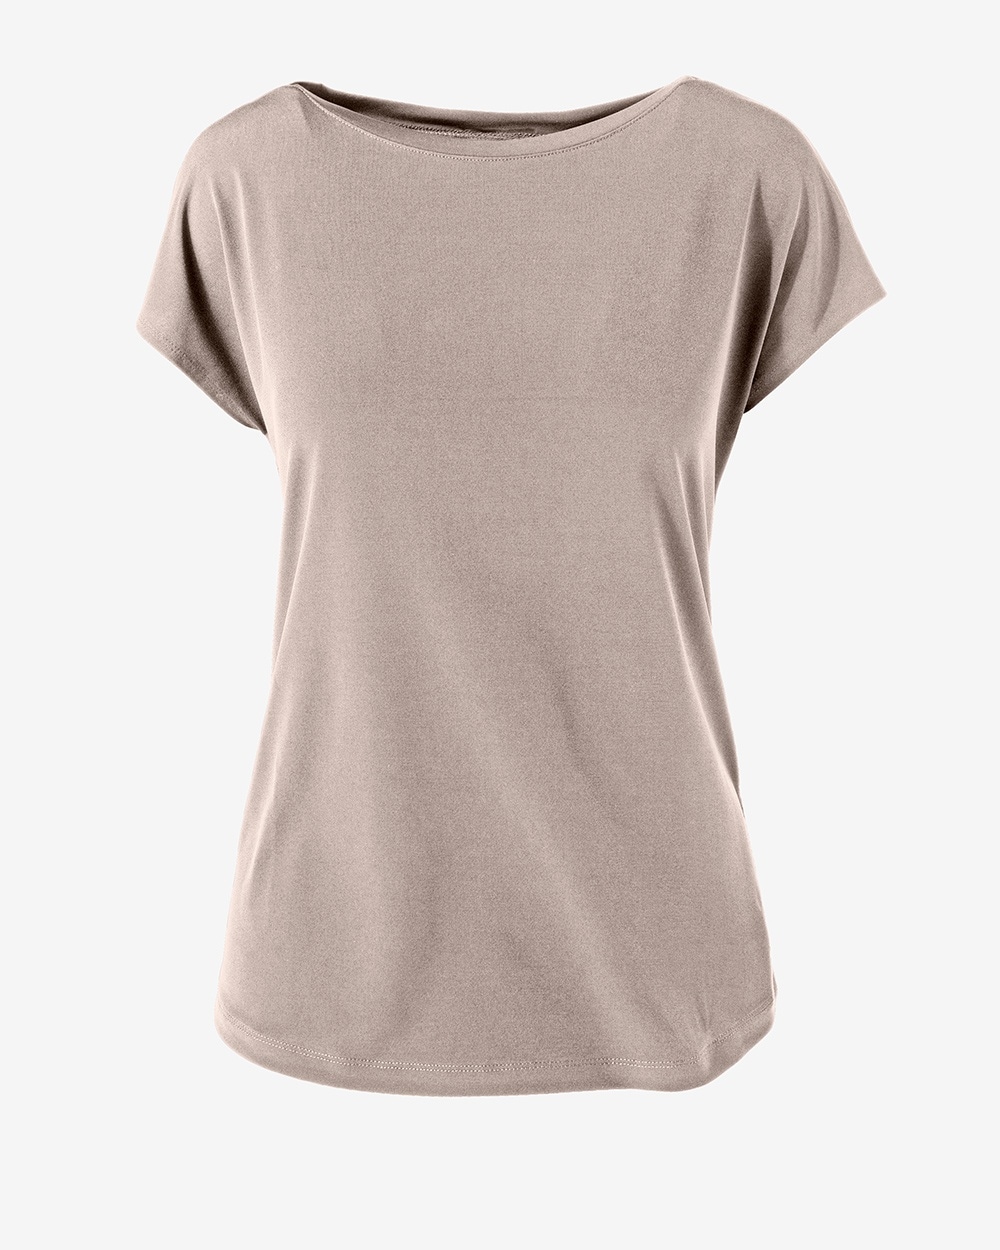 Smooth Boat-Neck Tee